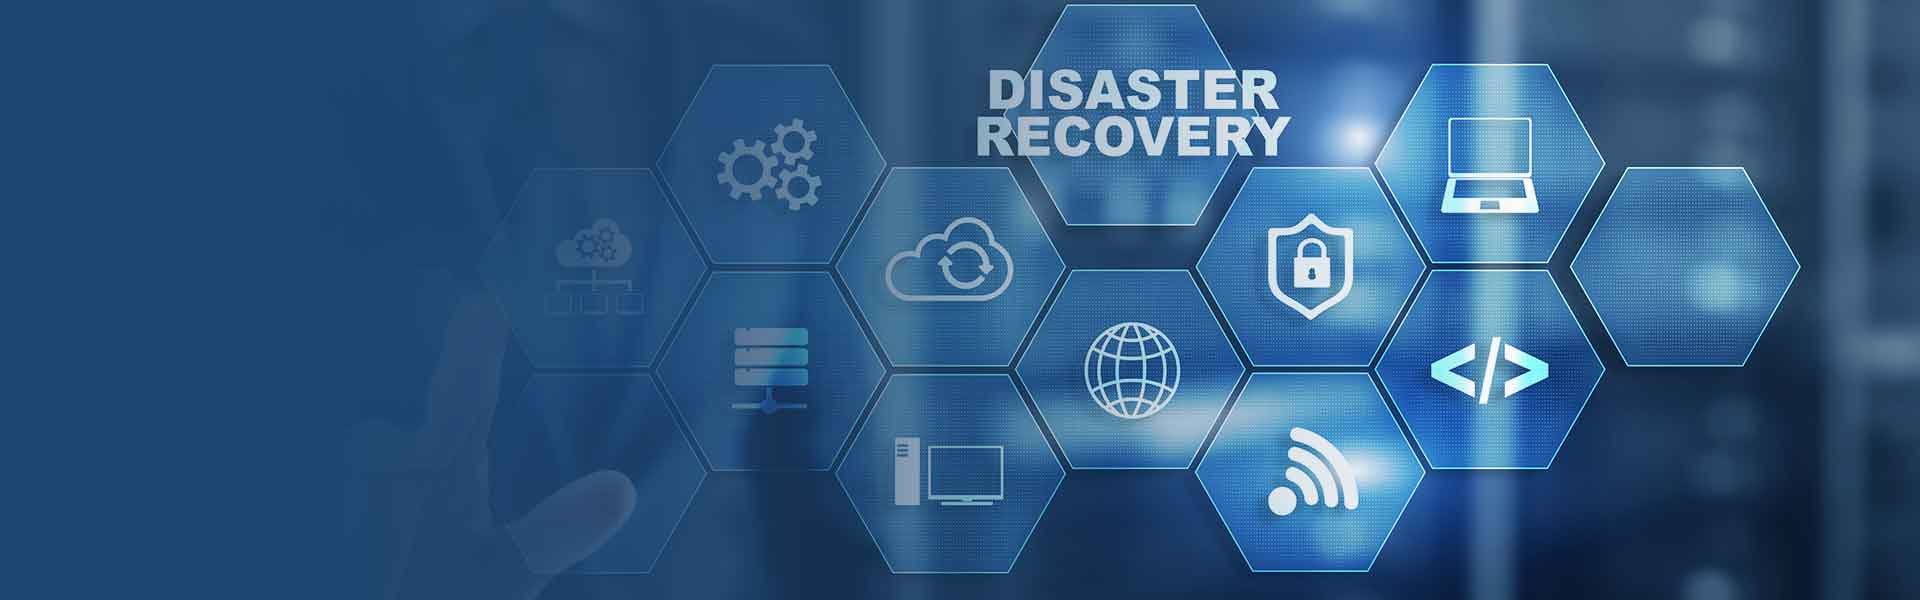 Disaster-Recovery-3